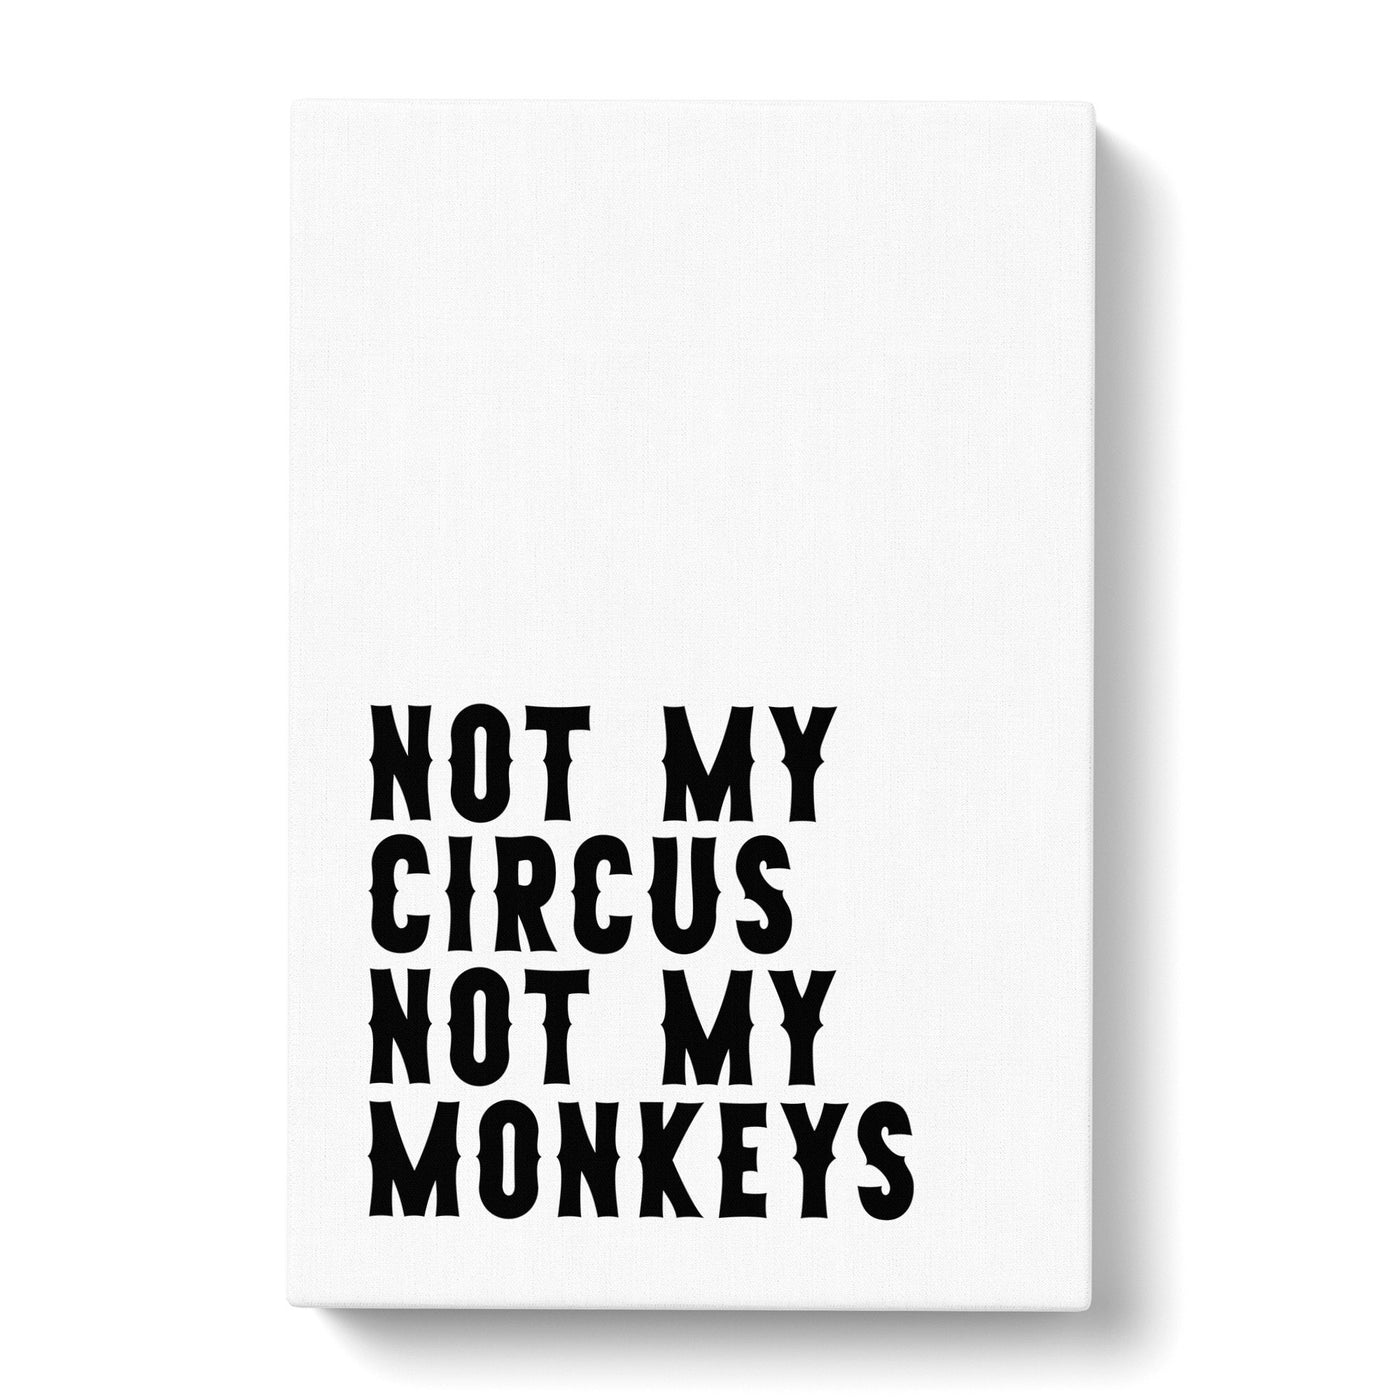 Not My Circus Not My Monkeys Typography Canvas Print Main Image